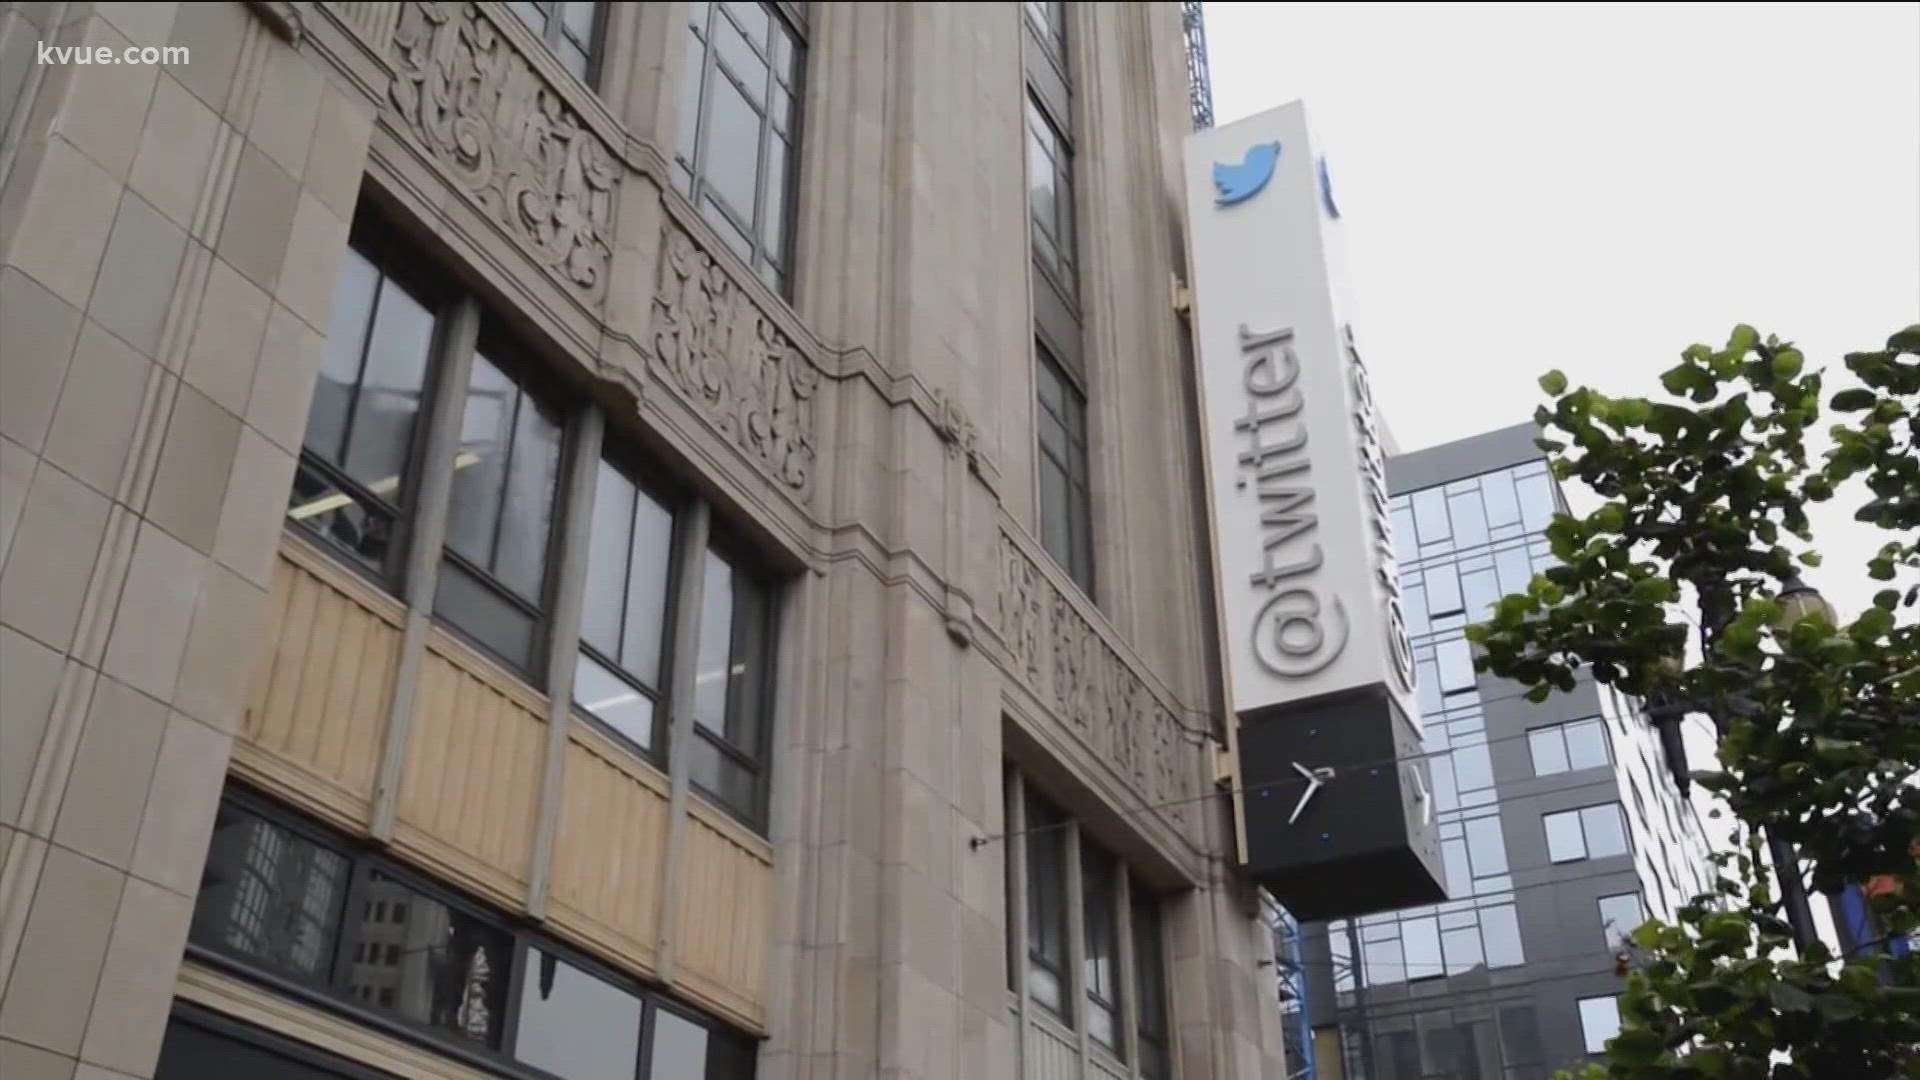 After weeks of back-and-forth, Twitter announced a $44 billion deal.